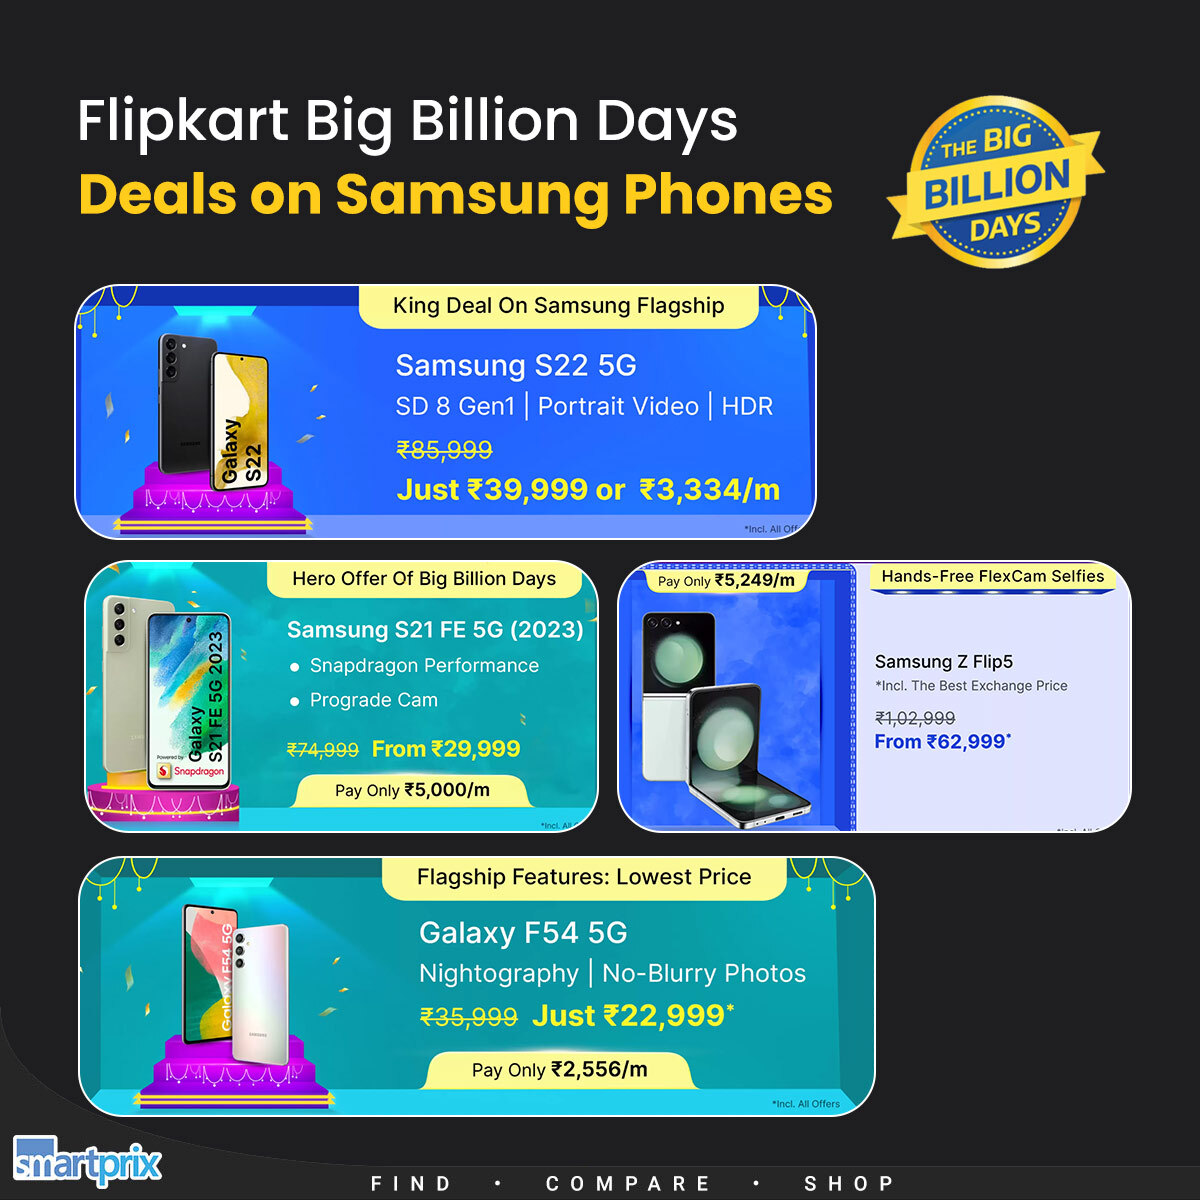 Attention, deal hunters! Samsung phone prices have taken center stage, but is this a truly historic low? Verify it using Smartprix's price history feature!

#SamsungGalaxyS22 #GalaxyS21FE #GalaxyF54 #GalaxyZFlip5 #BigBillionDays #FlipkartBigBillionDays #SmartprixPriceHistory